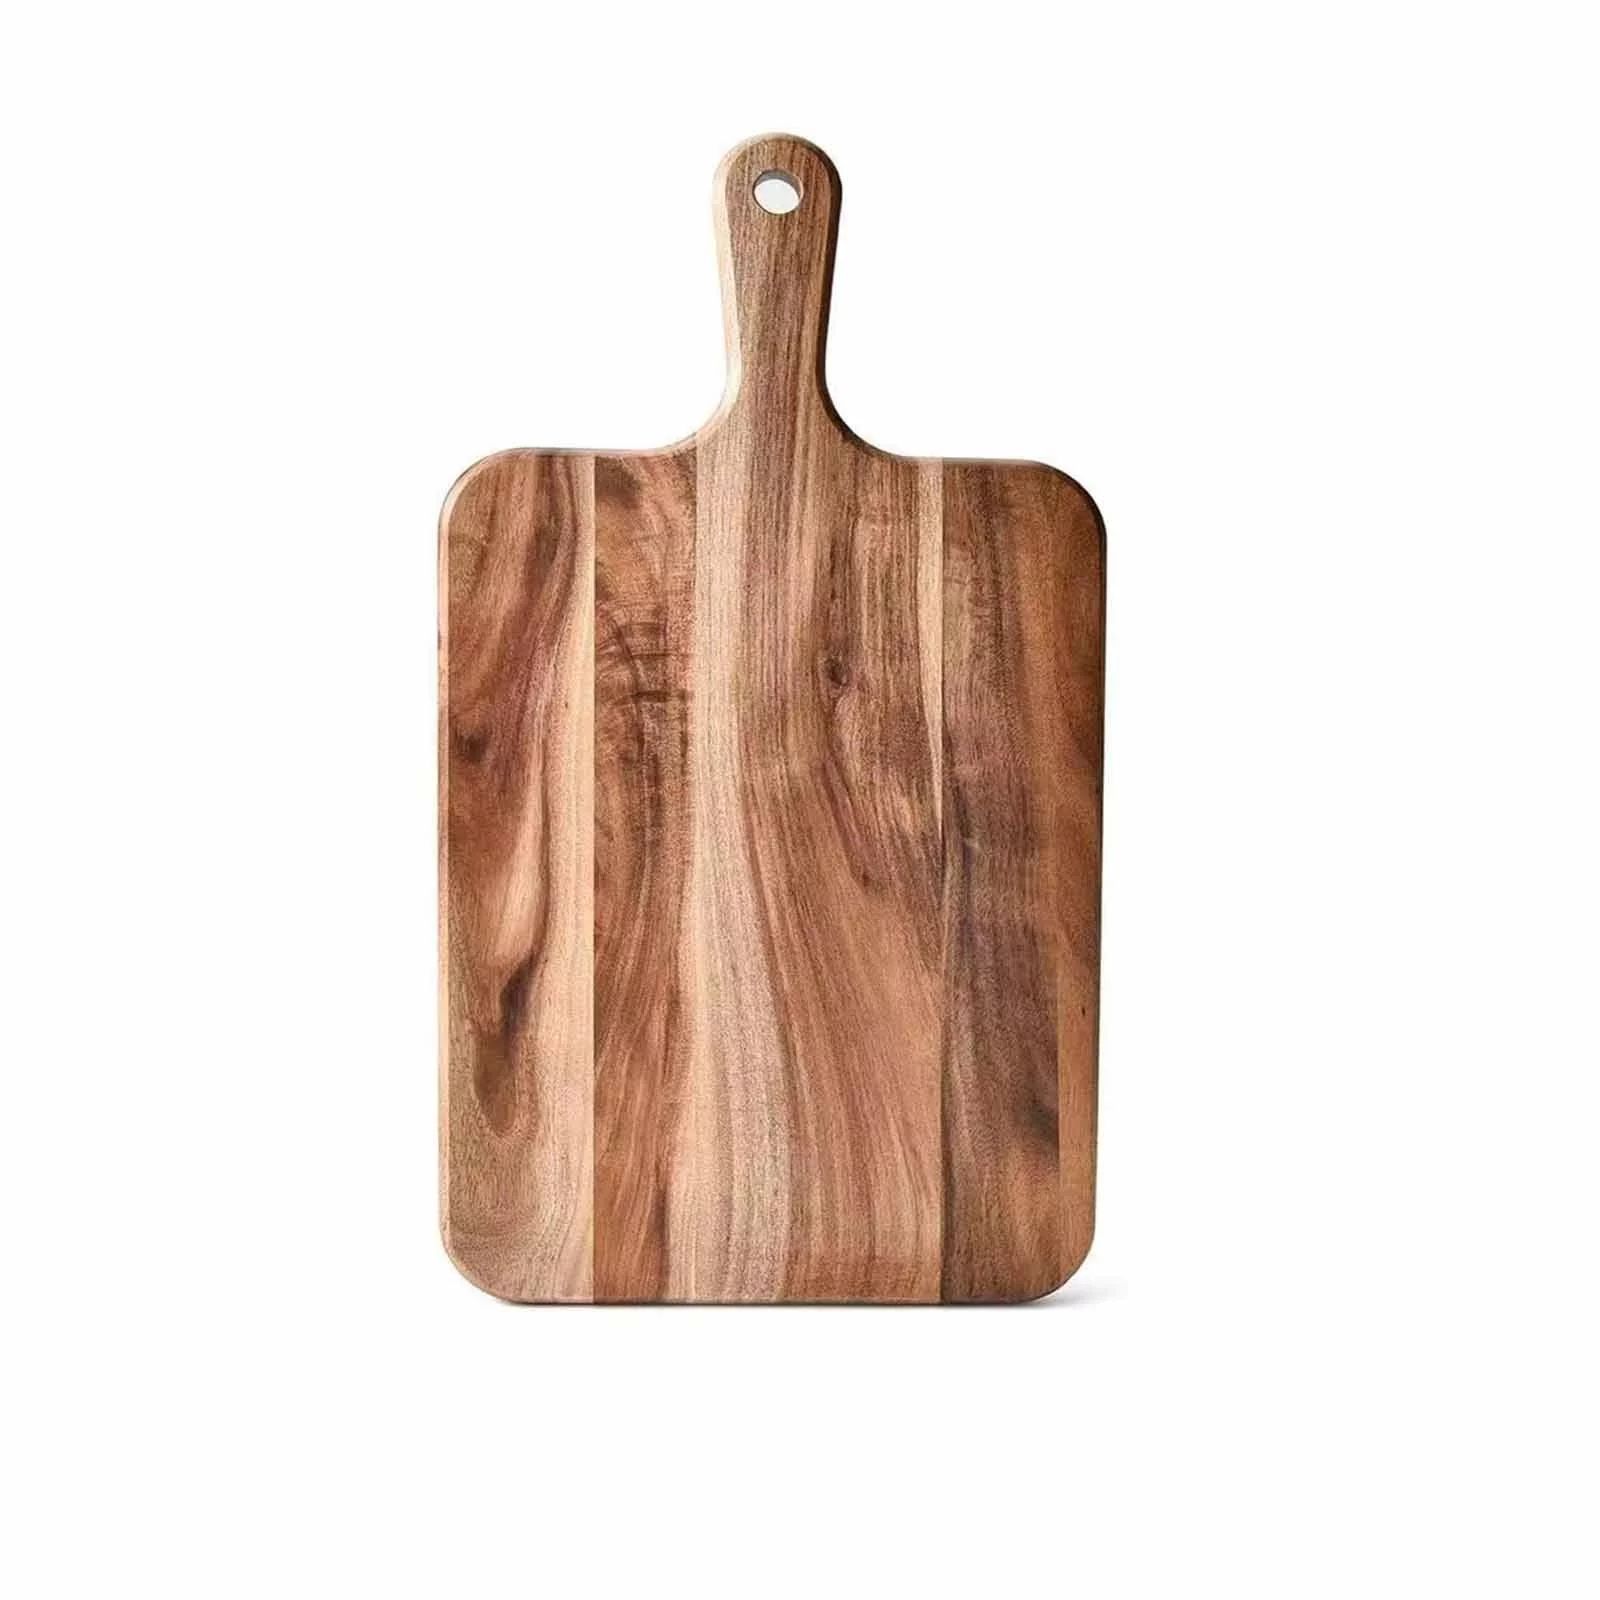 Wooden Circular Cutting Boards and Handle Cutting Boards for Meat, Cheese Boards, Vegetables, Bre... | Walmart (US)